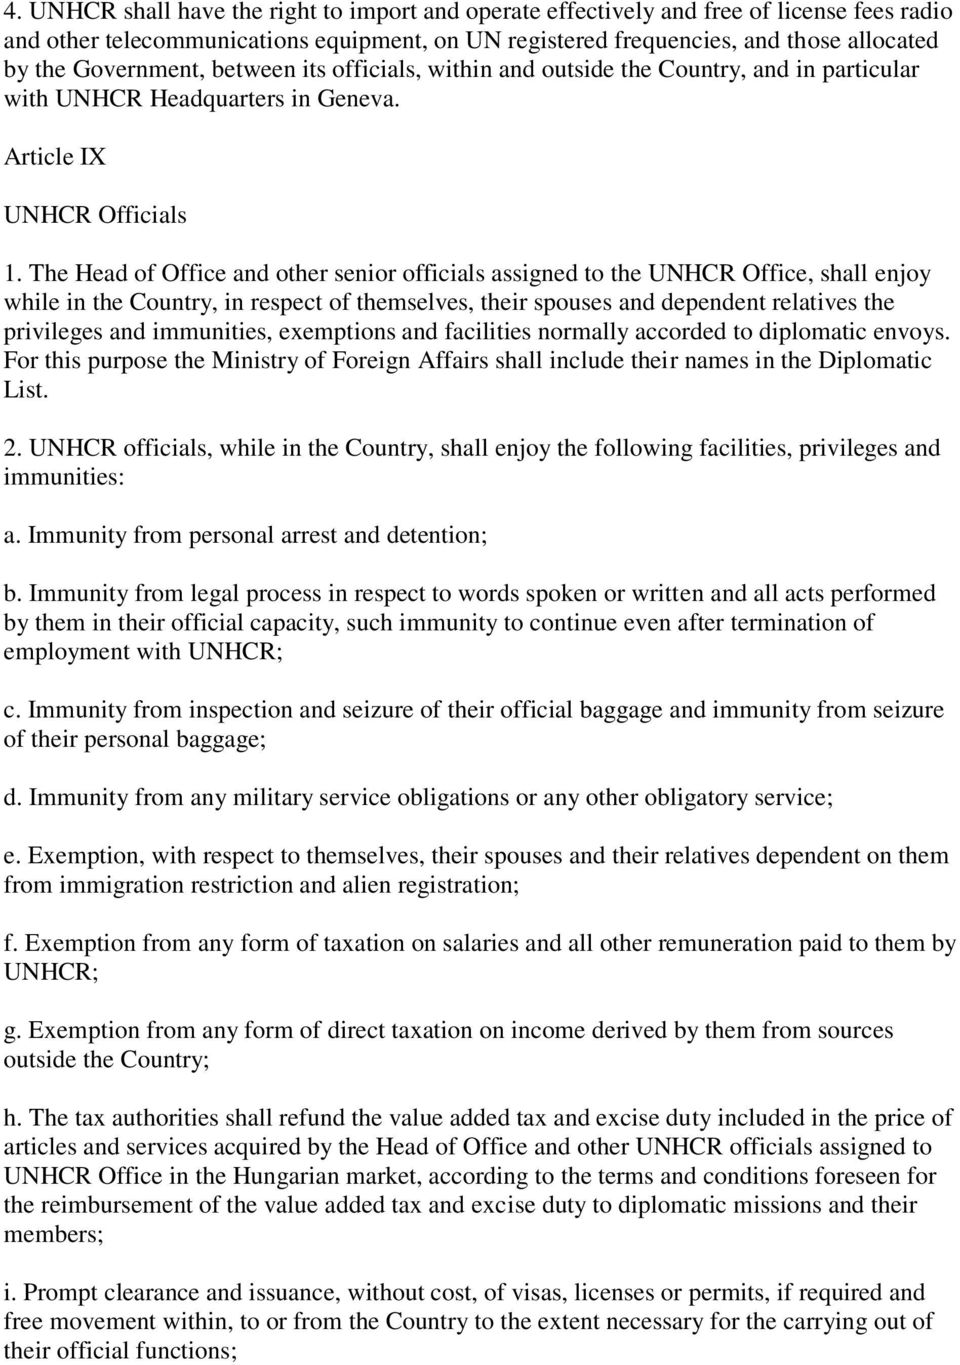 The Head of Office and other senior officials assigned to the UNHCR Office, shall enjoy while in the Country, in respect of themselves, their spouses and dependent relatives the privileges and